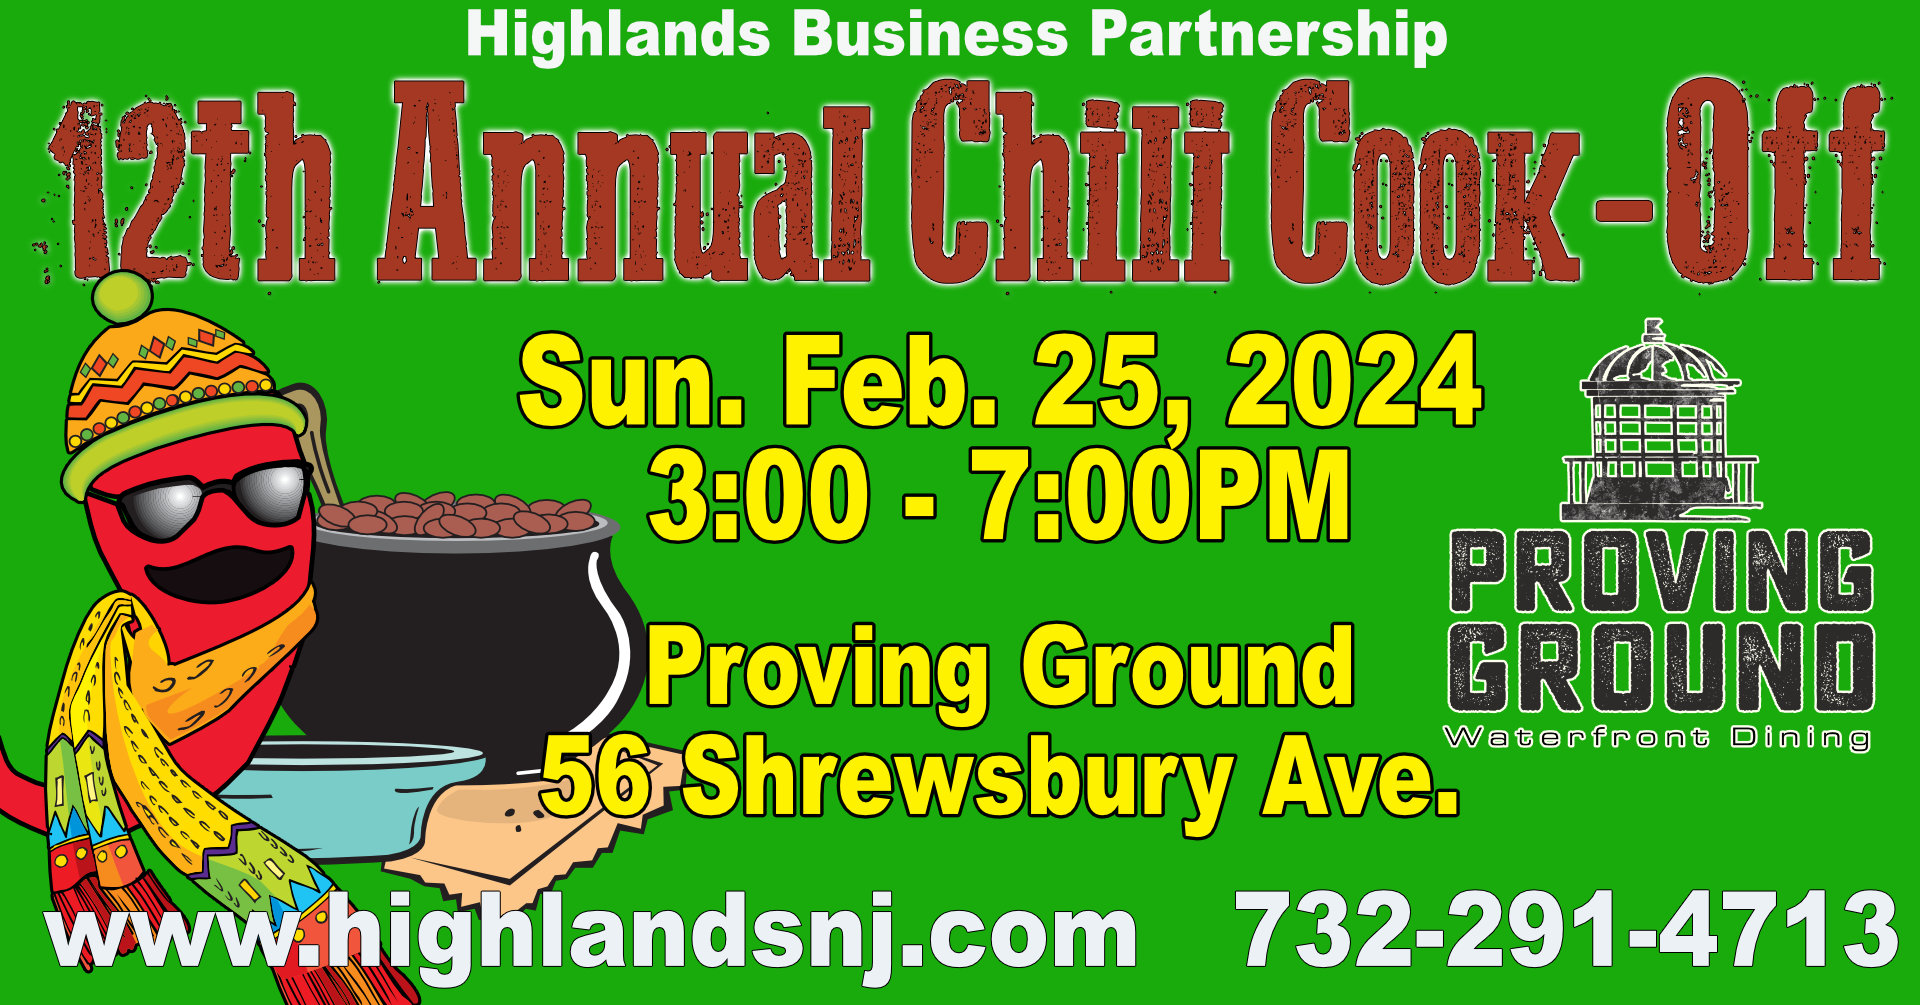 Highlands Annual Chili Cook Off